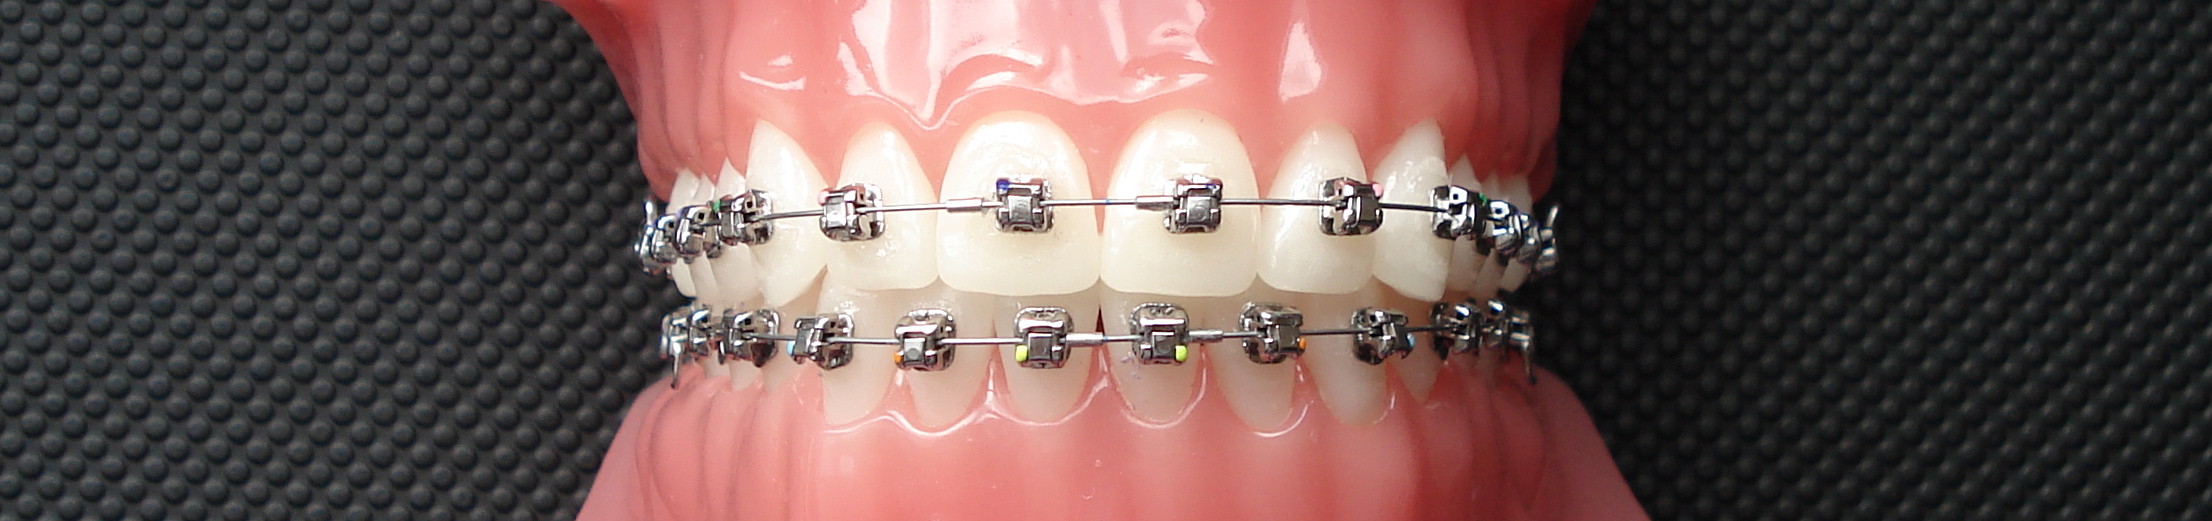 Damon Metal Fixed Braces at available at Brace Club in Guildford, Surrey.